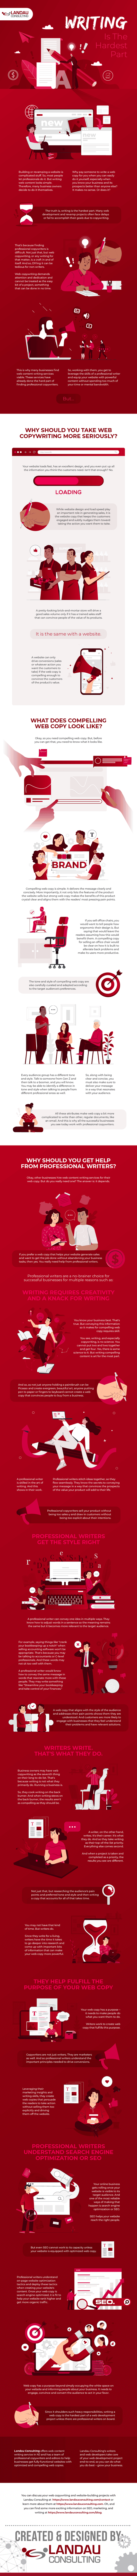 Writing-Is-The-Hardest-Part-infographic-image